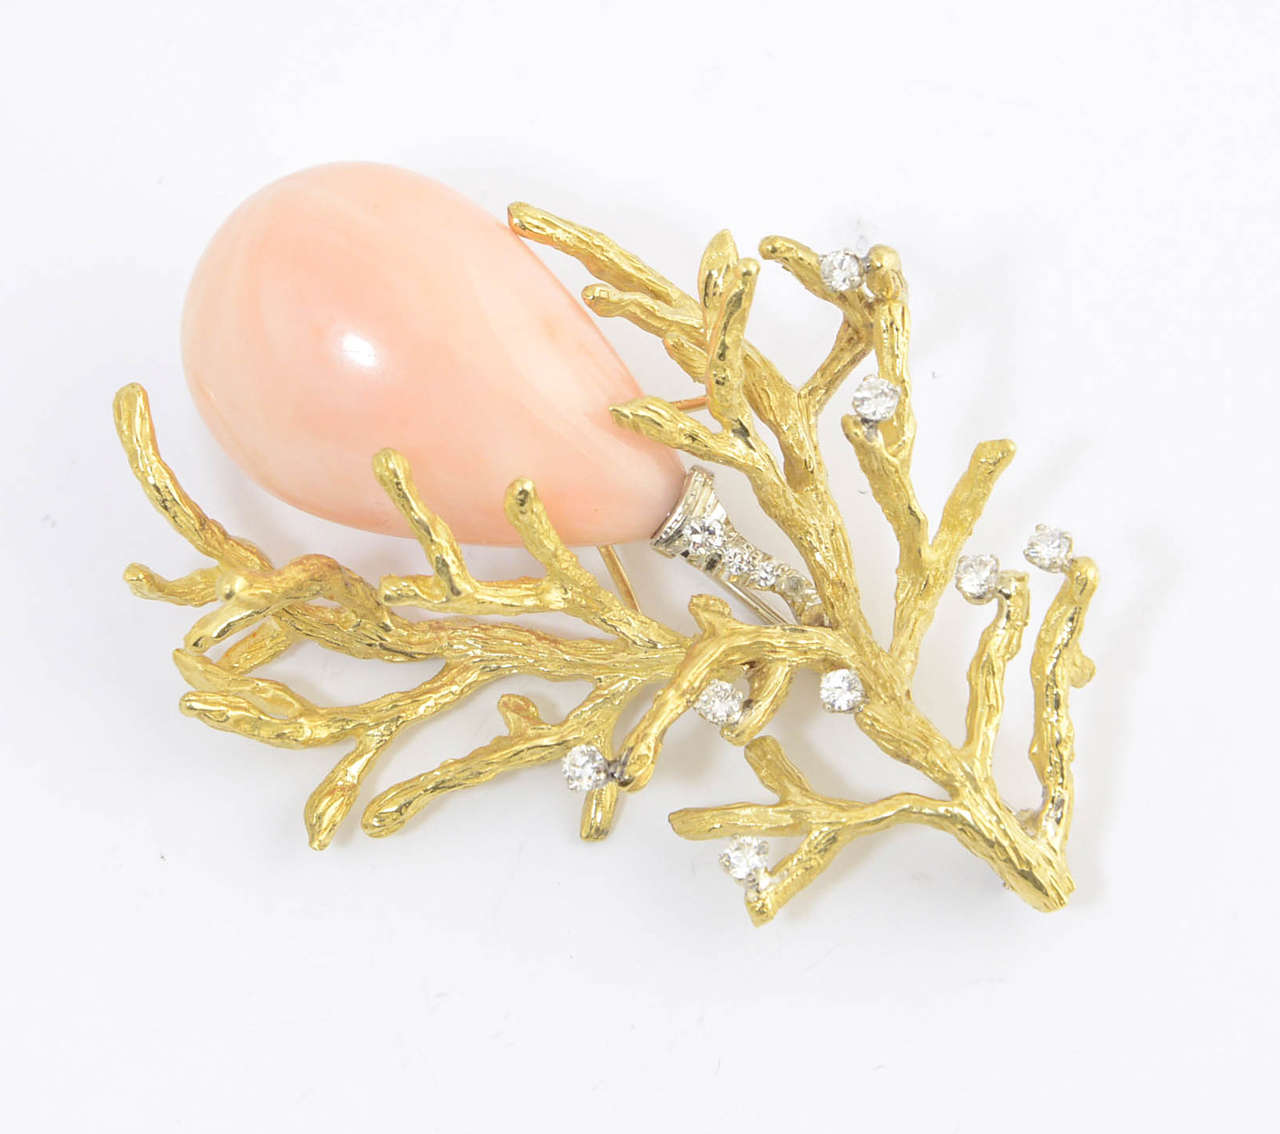 Features a large teardrop piece of coral set in a typical 1960's 18k yellow gold bark mounting with diamond accents.